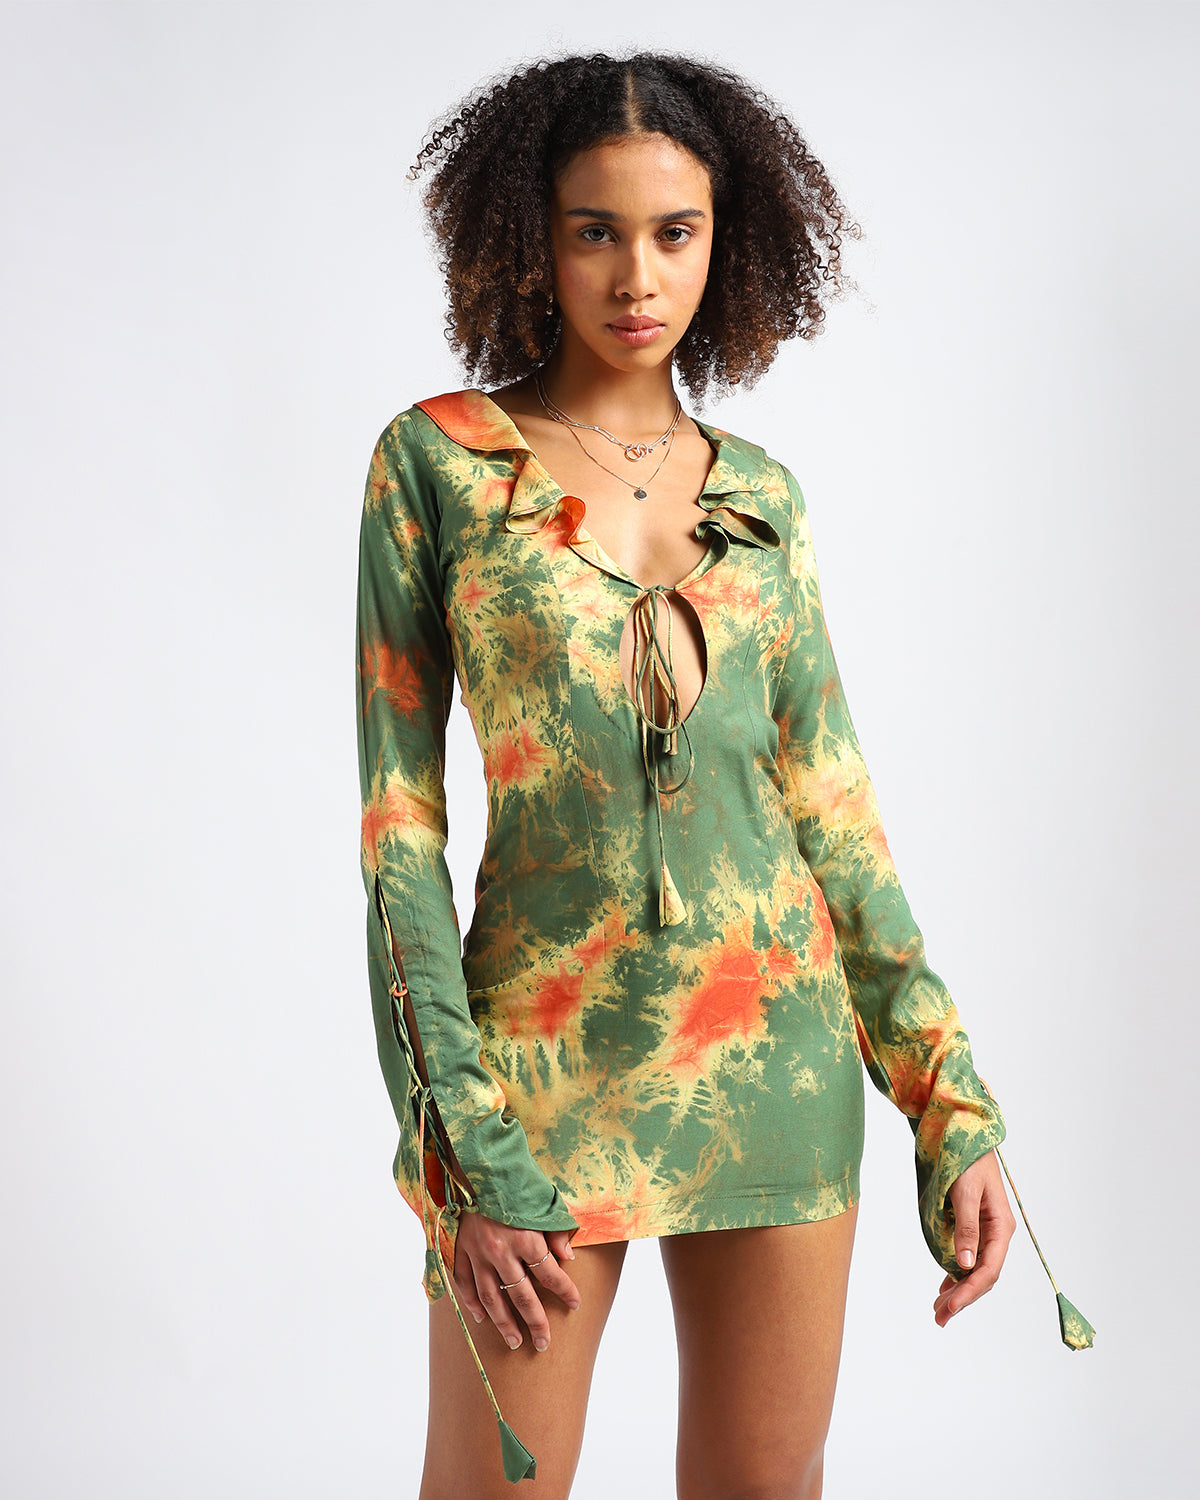 State Of Flow : Conscious Ruffled Key Hole Neck Line With Adjustable Bell Sleeves Mini Dress